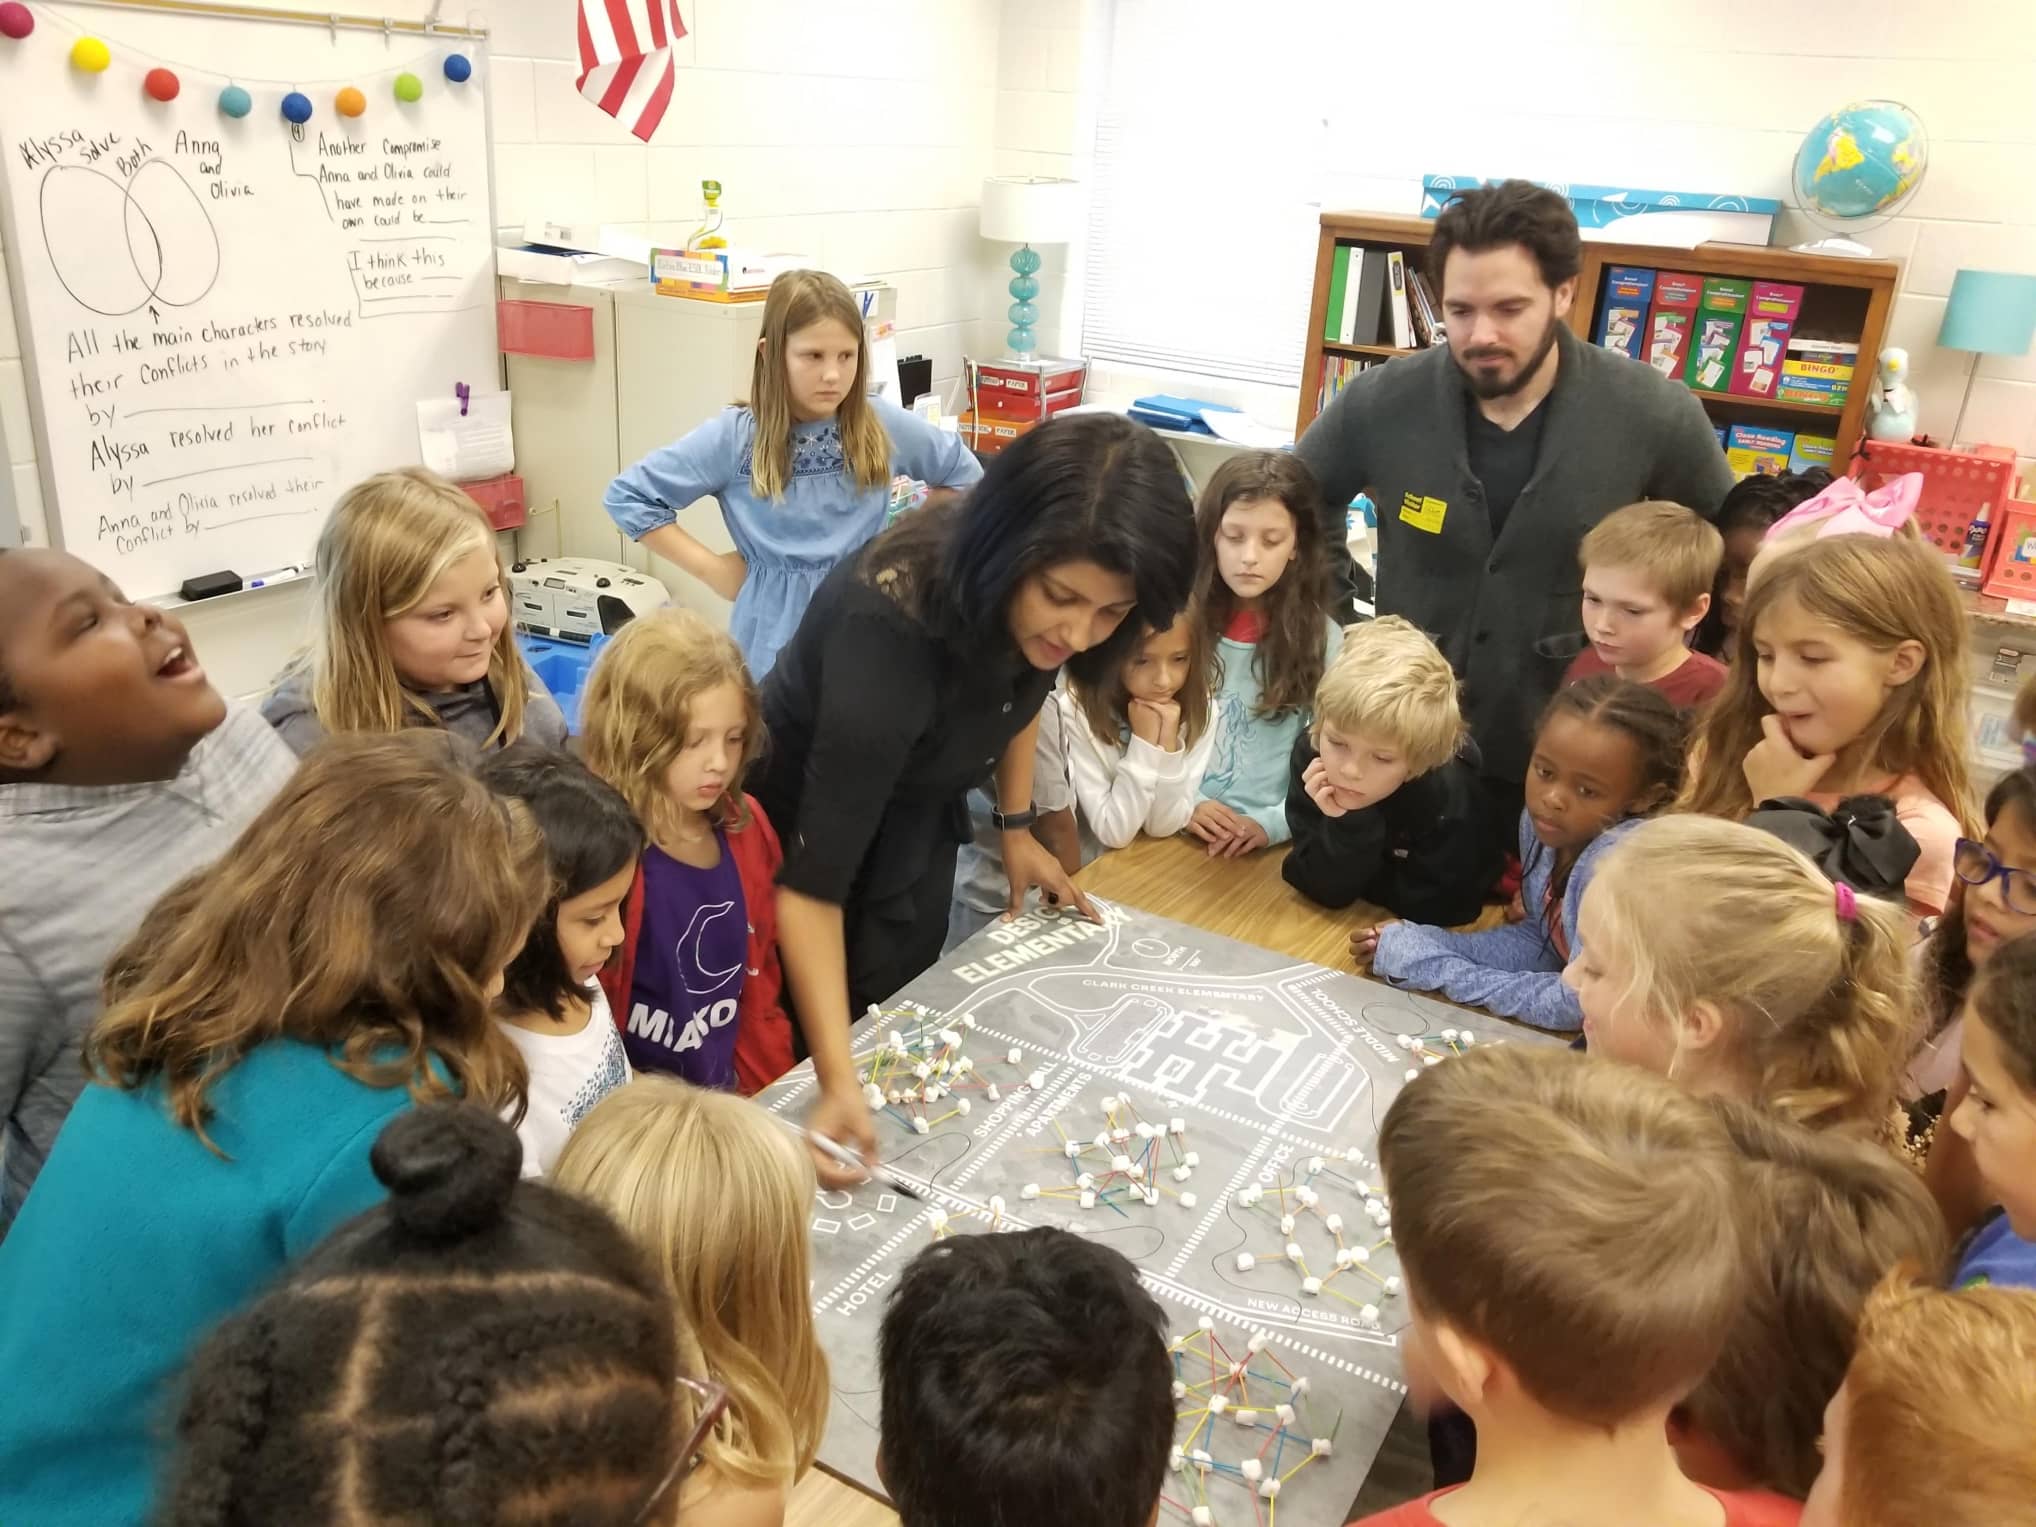 Ross Titus volunteers often at schools to introduce students to Architecture and Urban Design as a STEM profession.